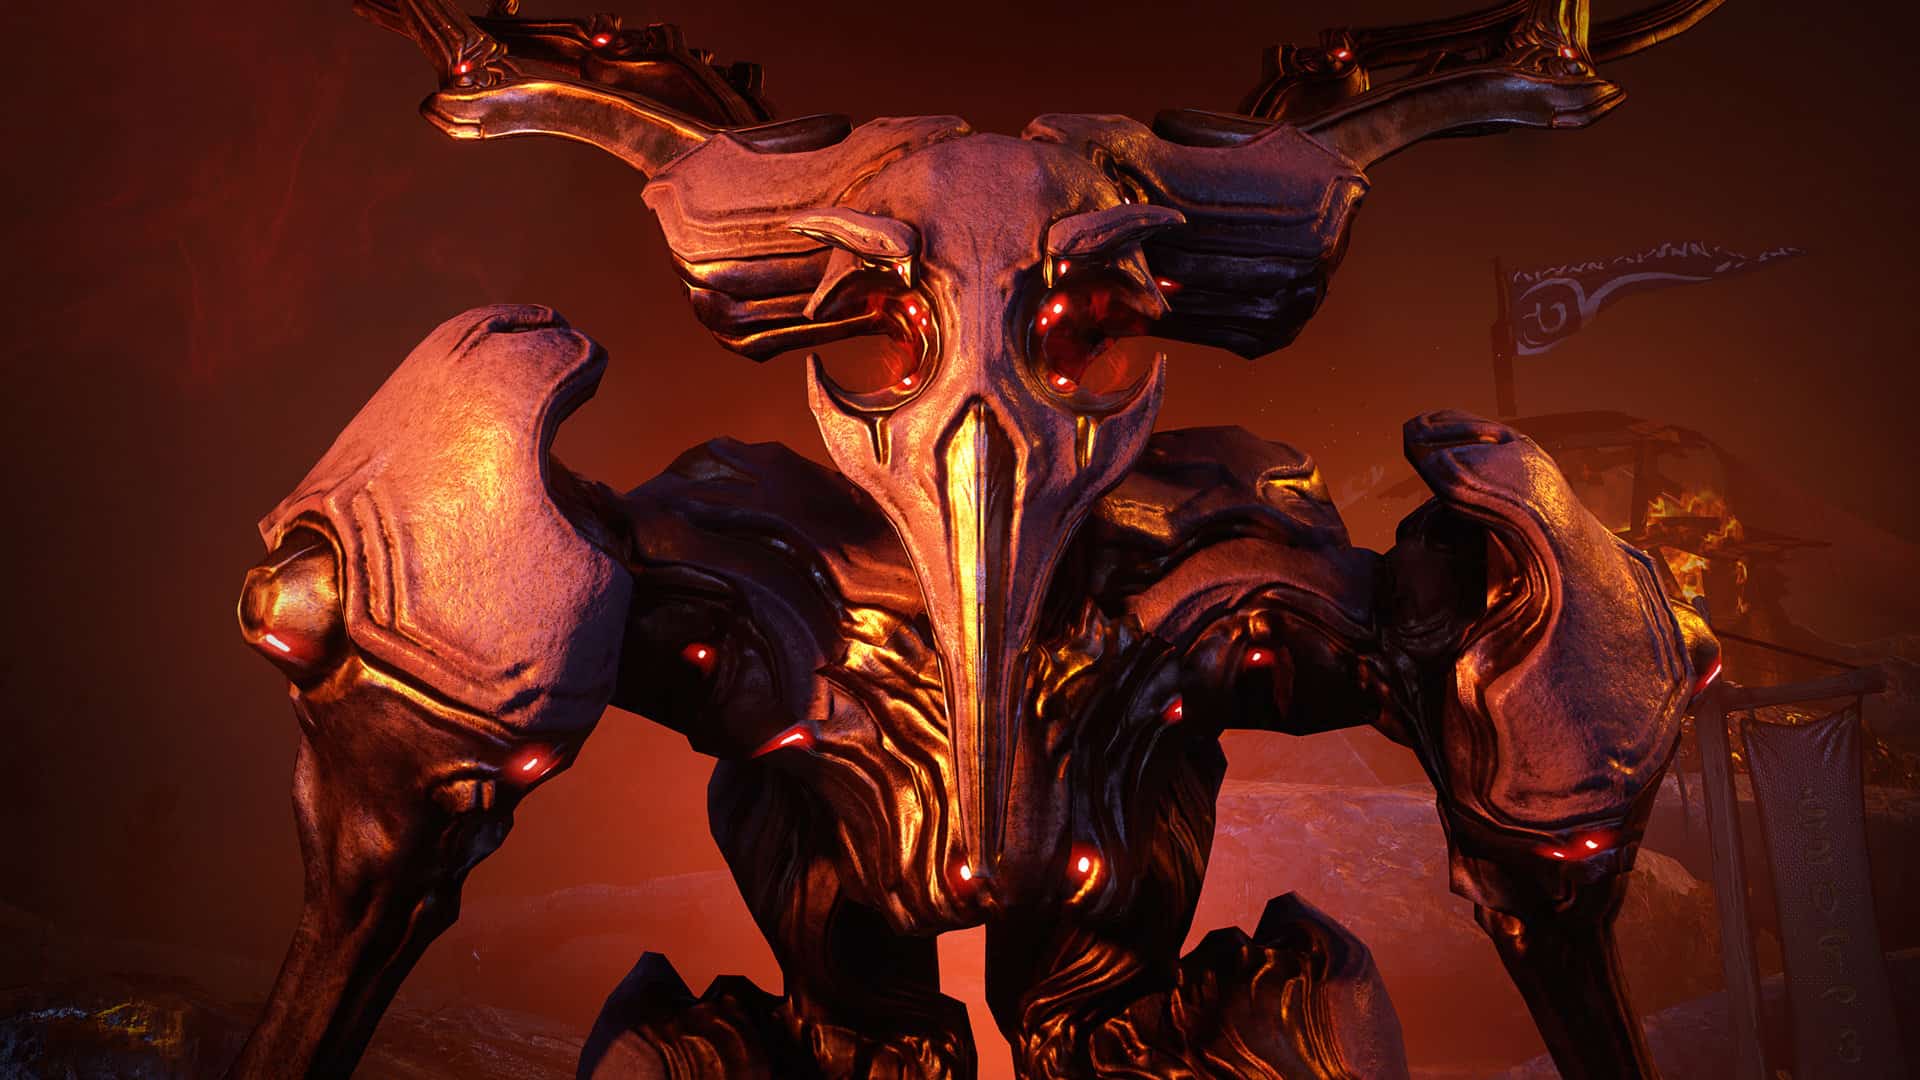 Warframe to get Cross Play and Cross Save later this year